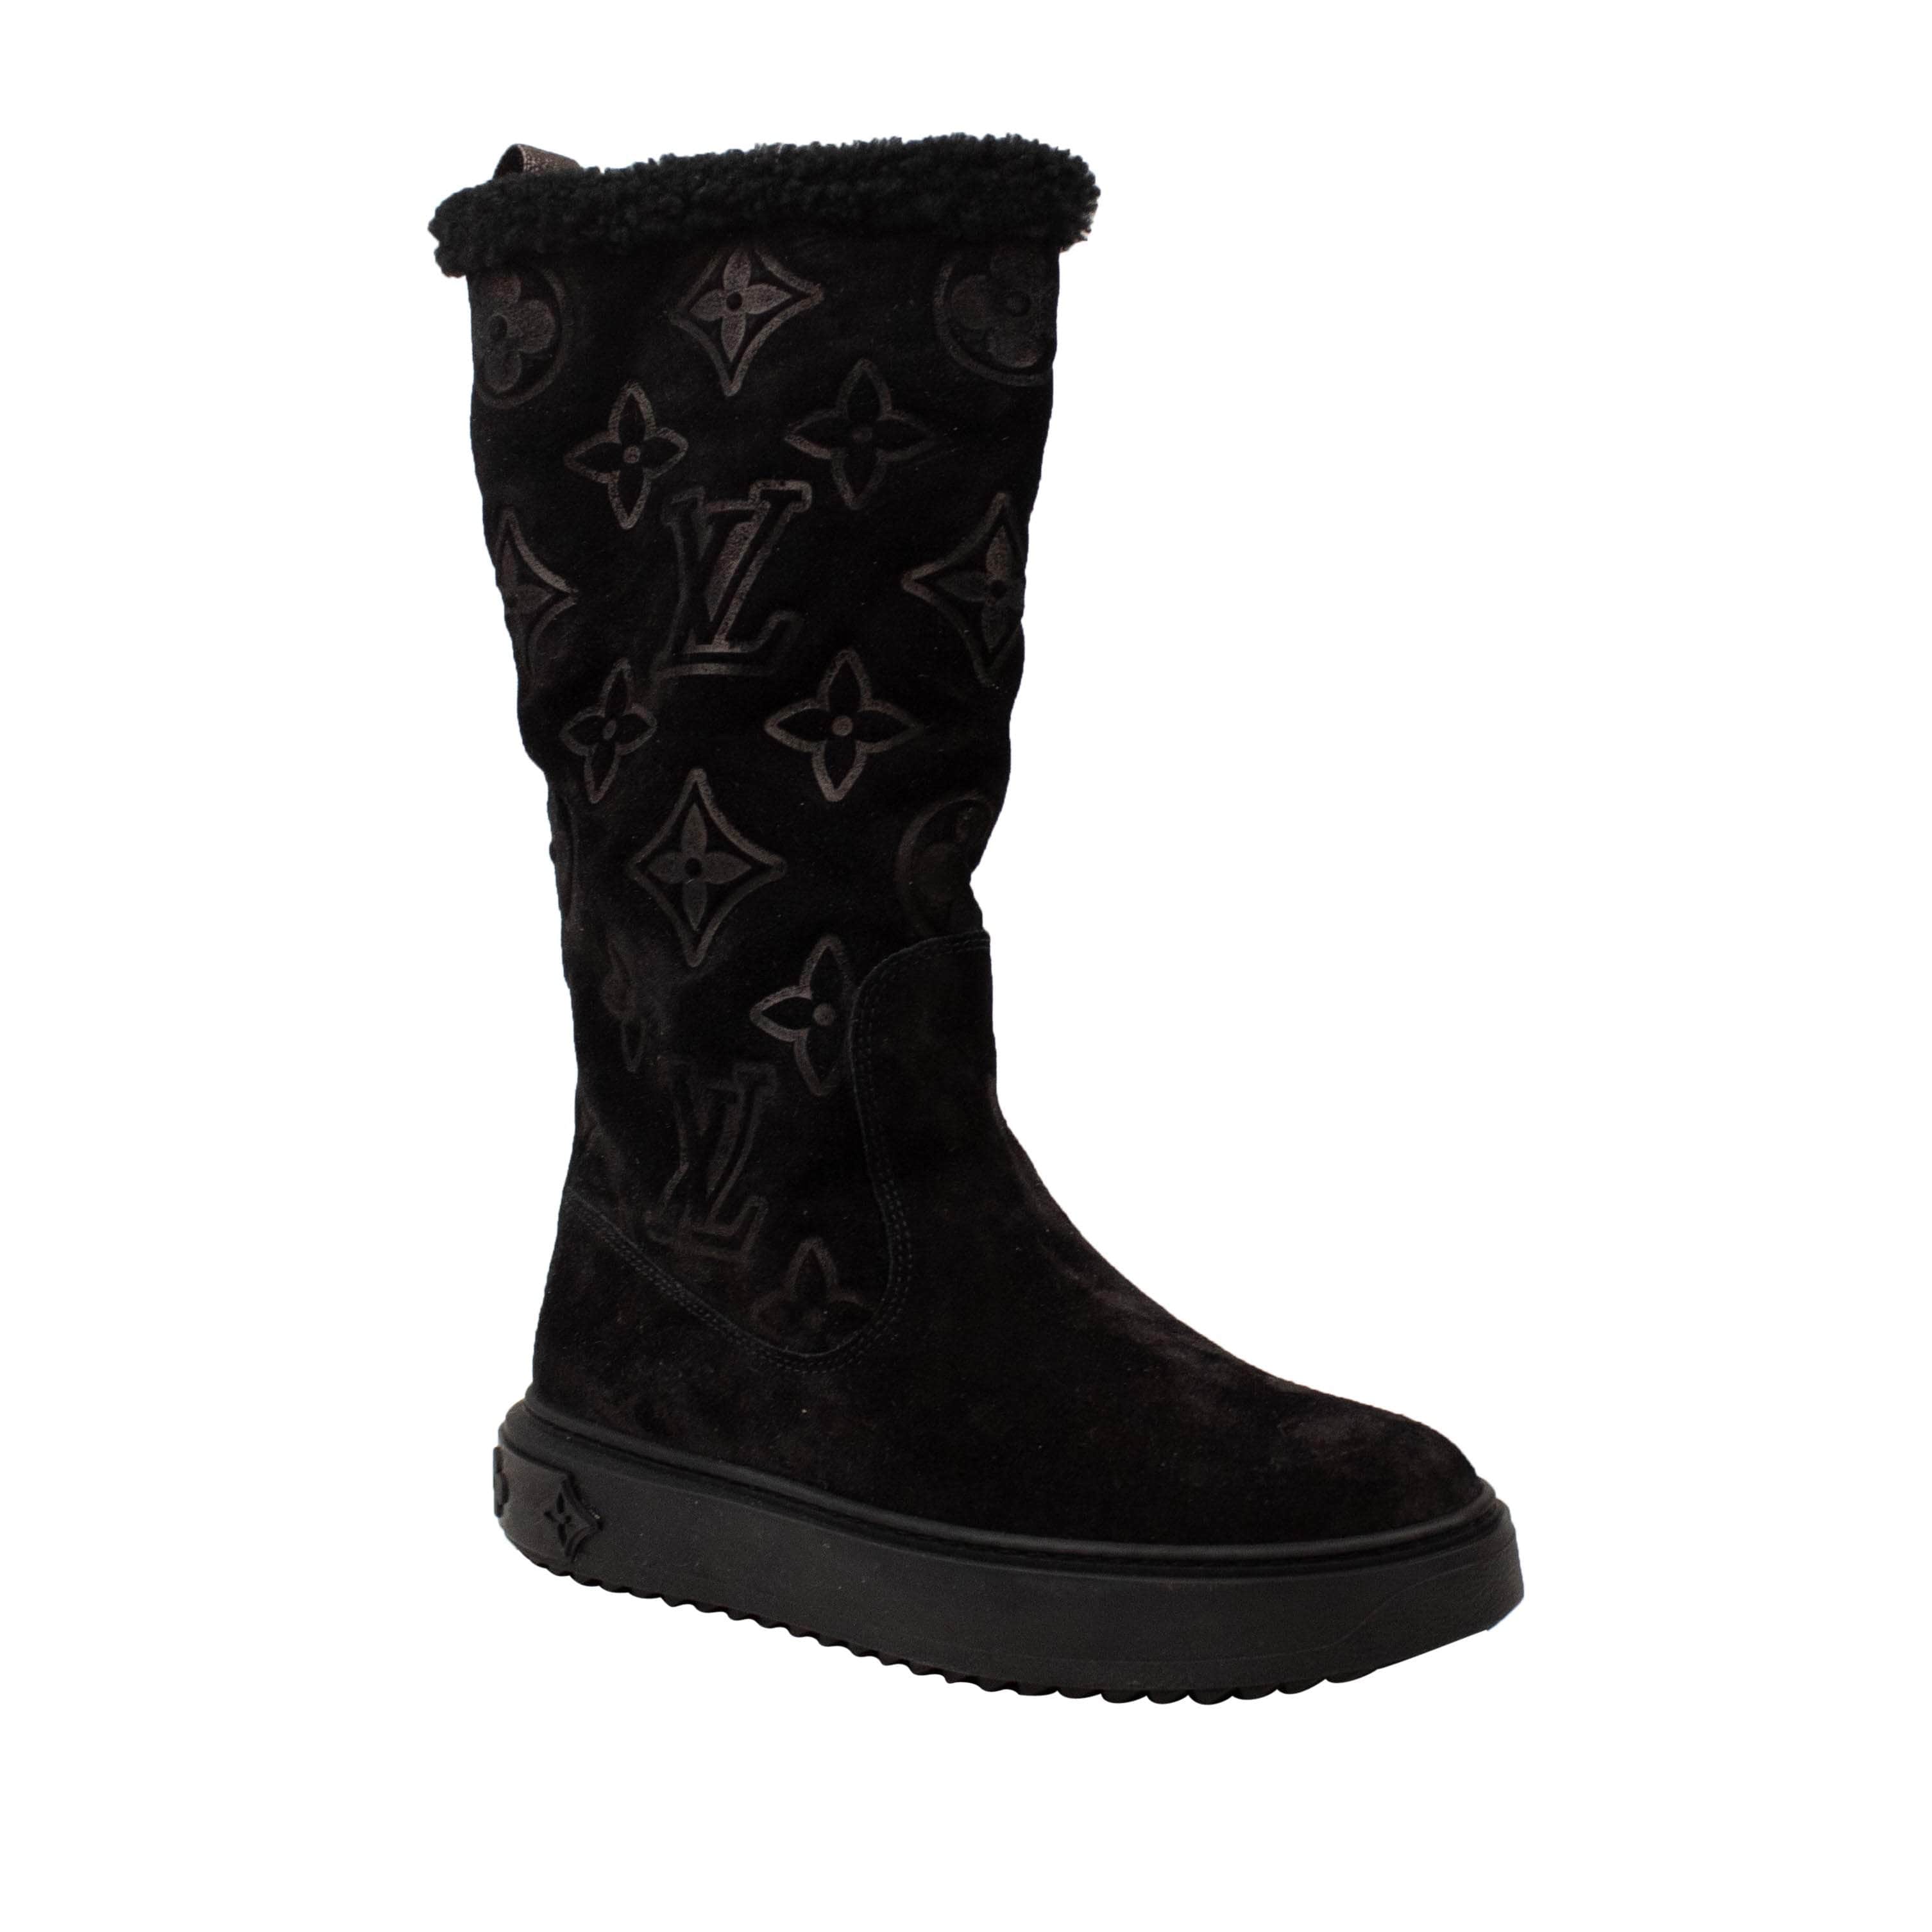 Louis Vuitton 500-750, channelenable-all, chicmi, couponcollection, gender-womens, main-shoes, size-35, SPO, stadiumgoods, womens-ankle-boots 35 / 75LE-2222/35 Black Suede Logo Boots 75LE-2222/35 75LE-2222/35